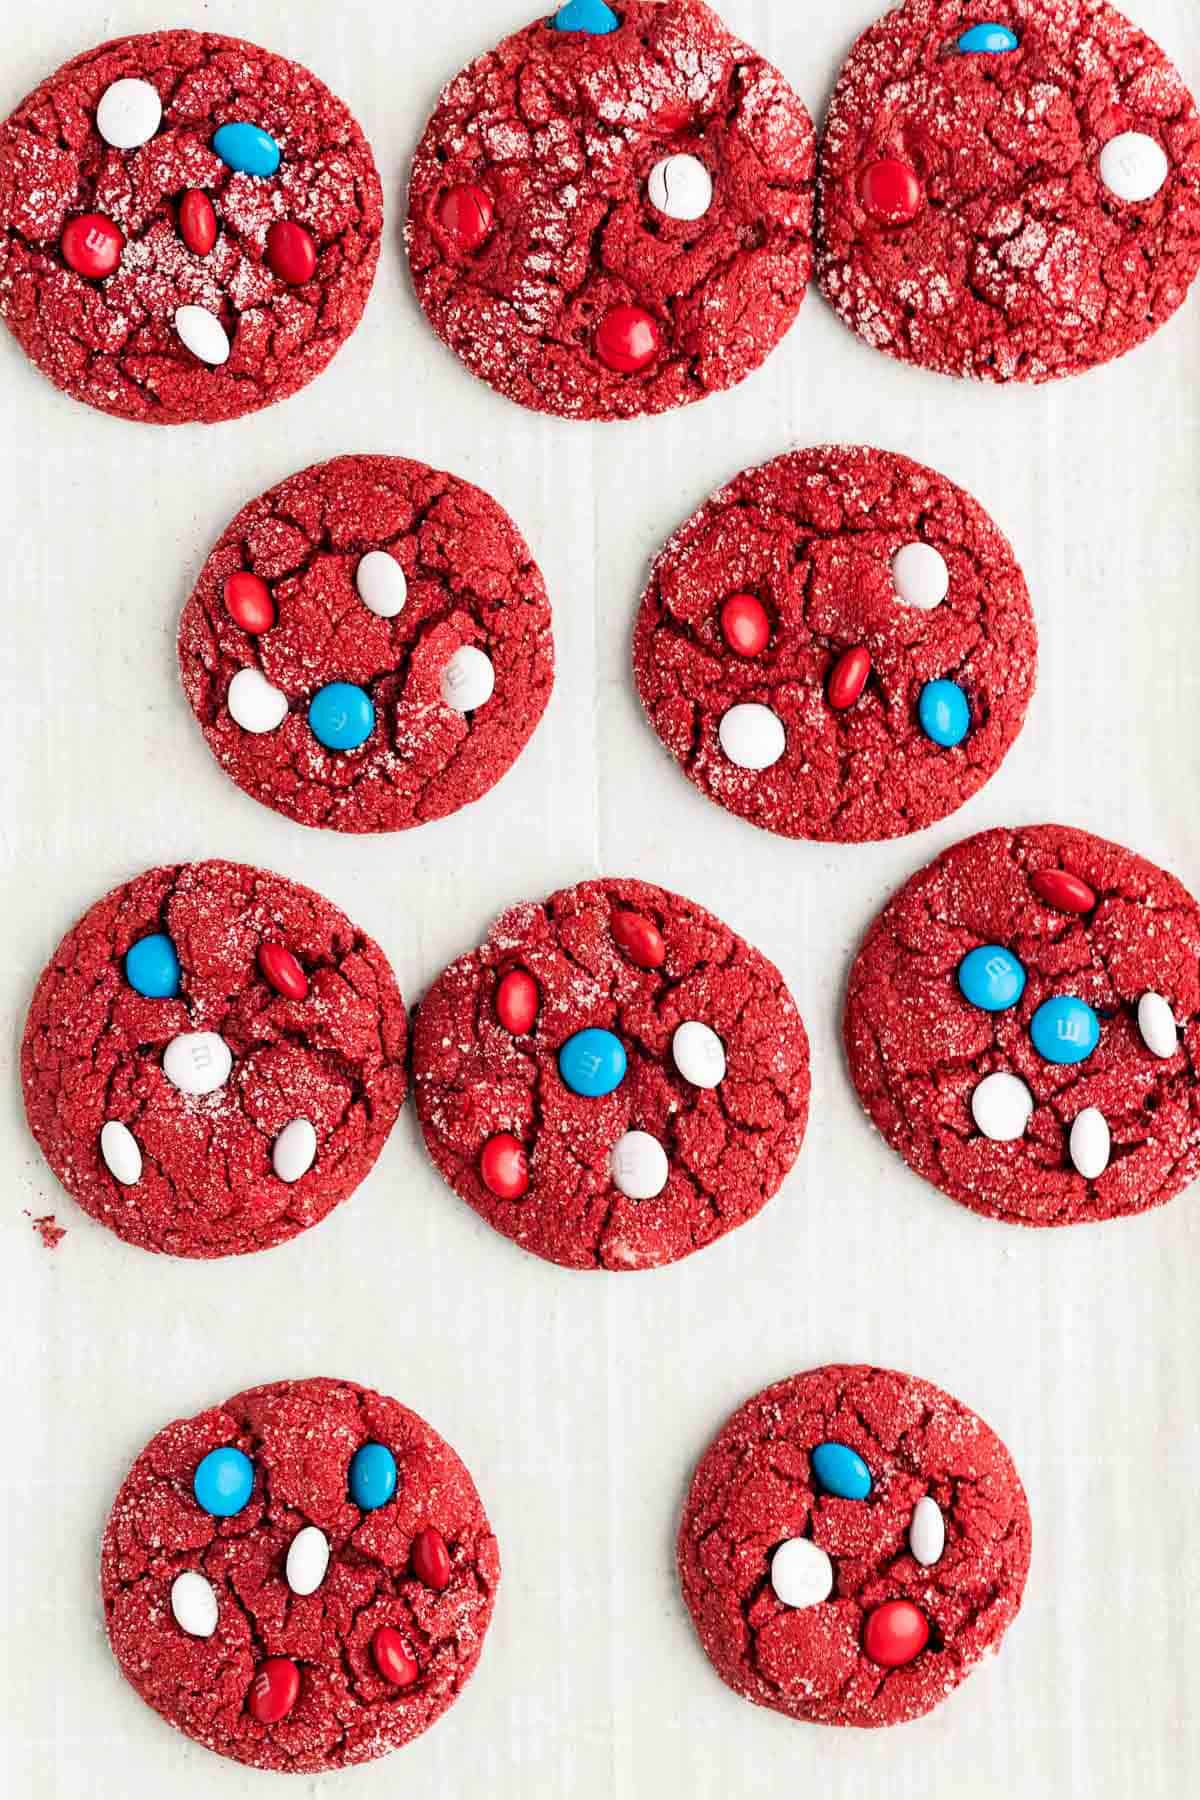 Red velvet cake mix cookies on parchment paper.